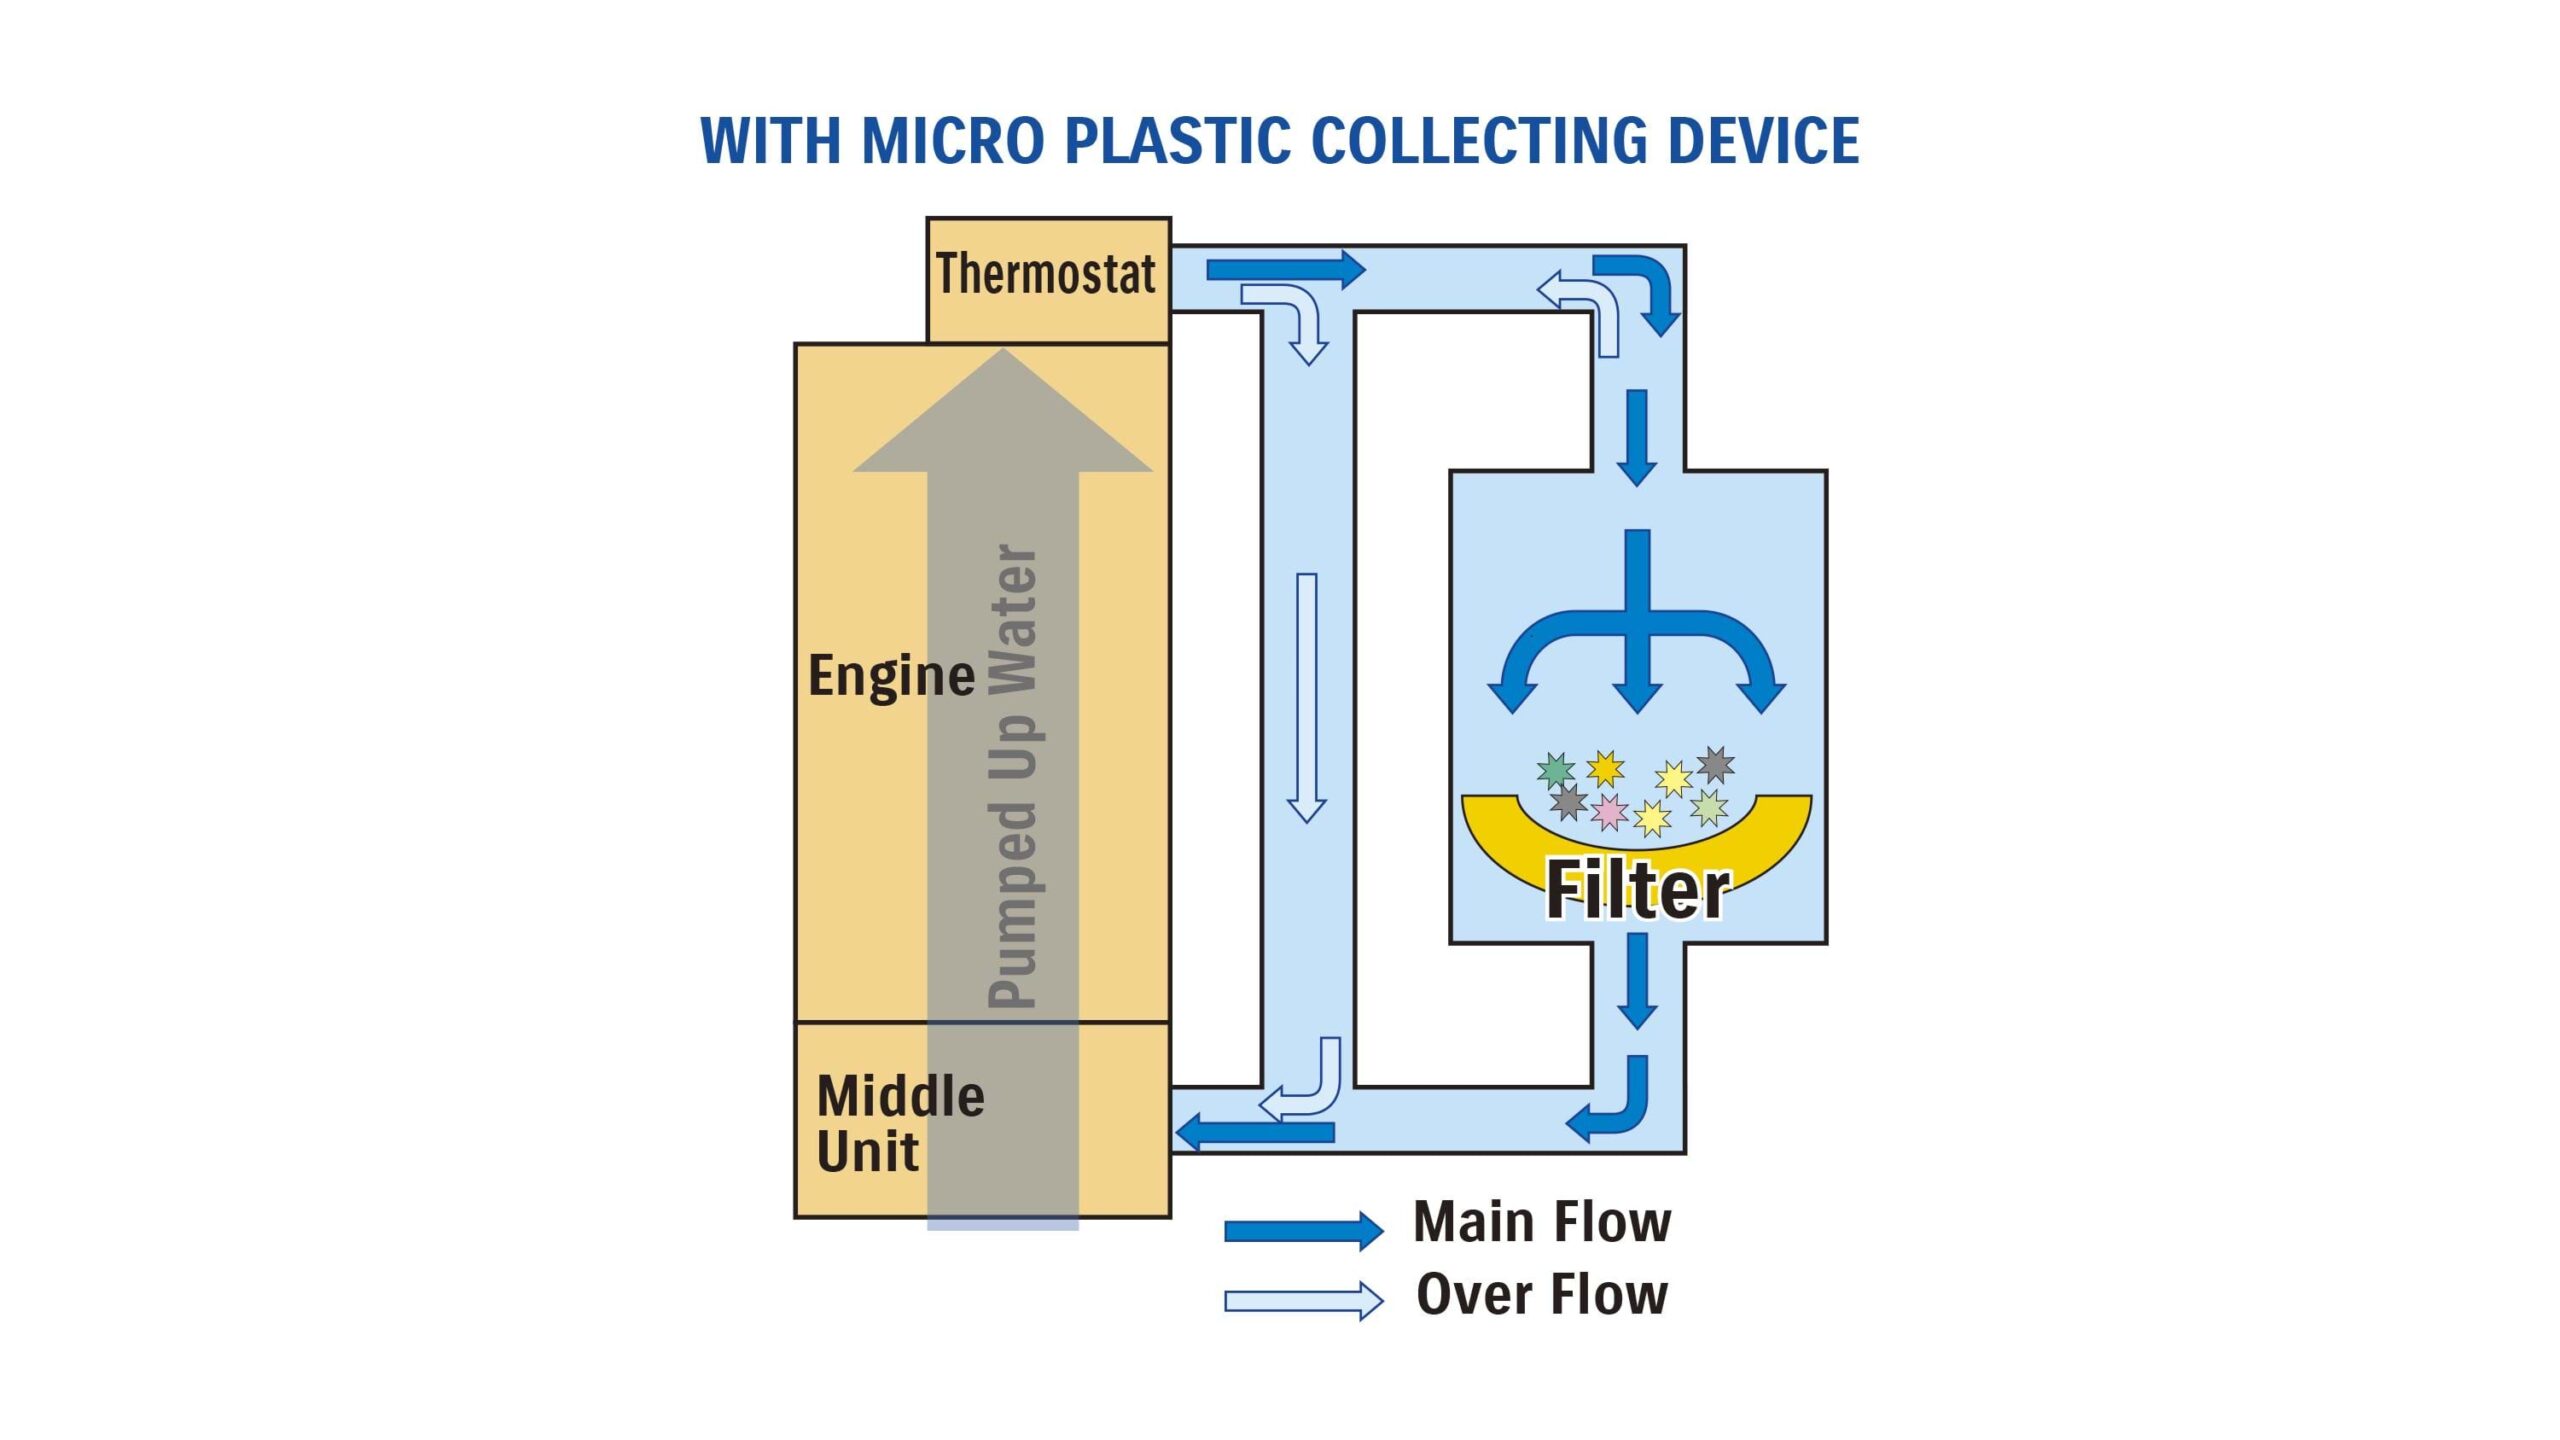 Suzuki introduces world’s first Micro-Plastic Collecting Device